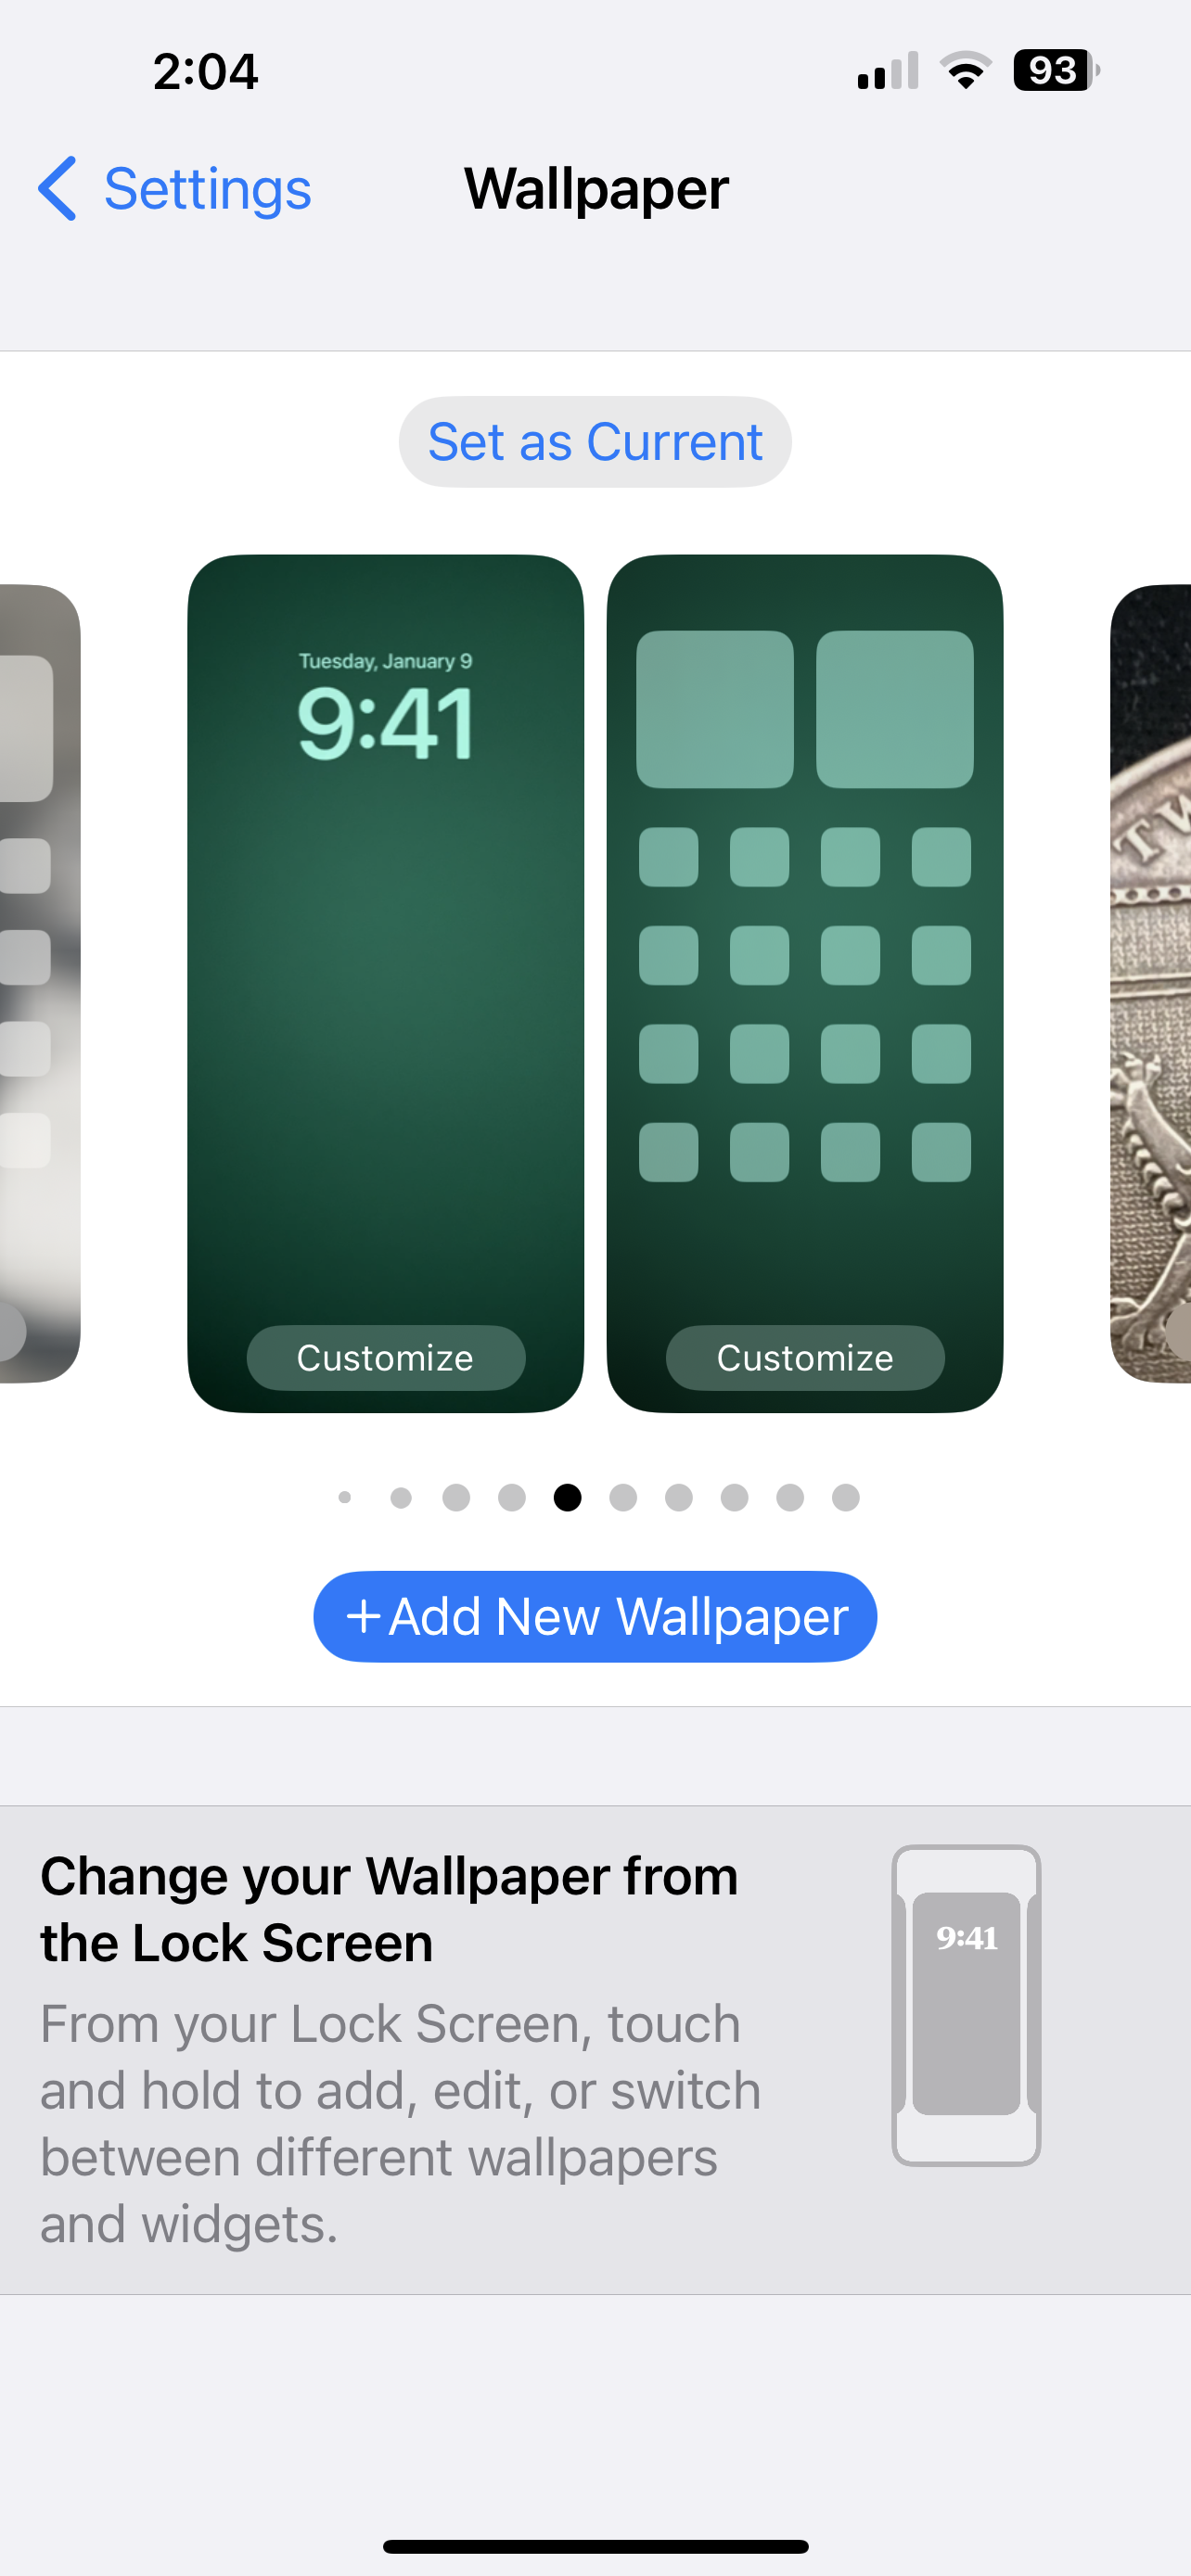 How to delete old wallpapers? - Apple Community